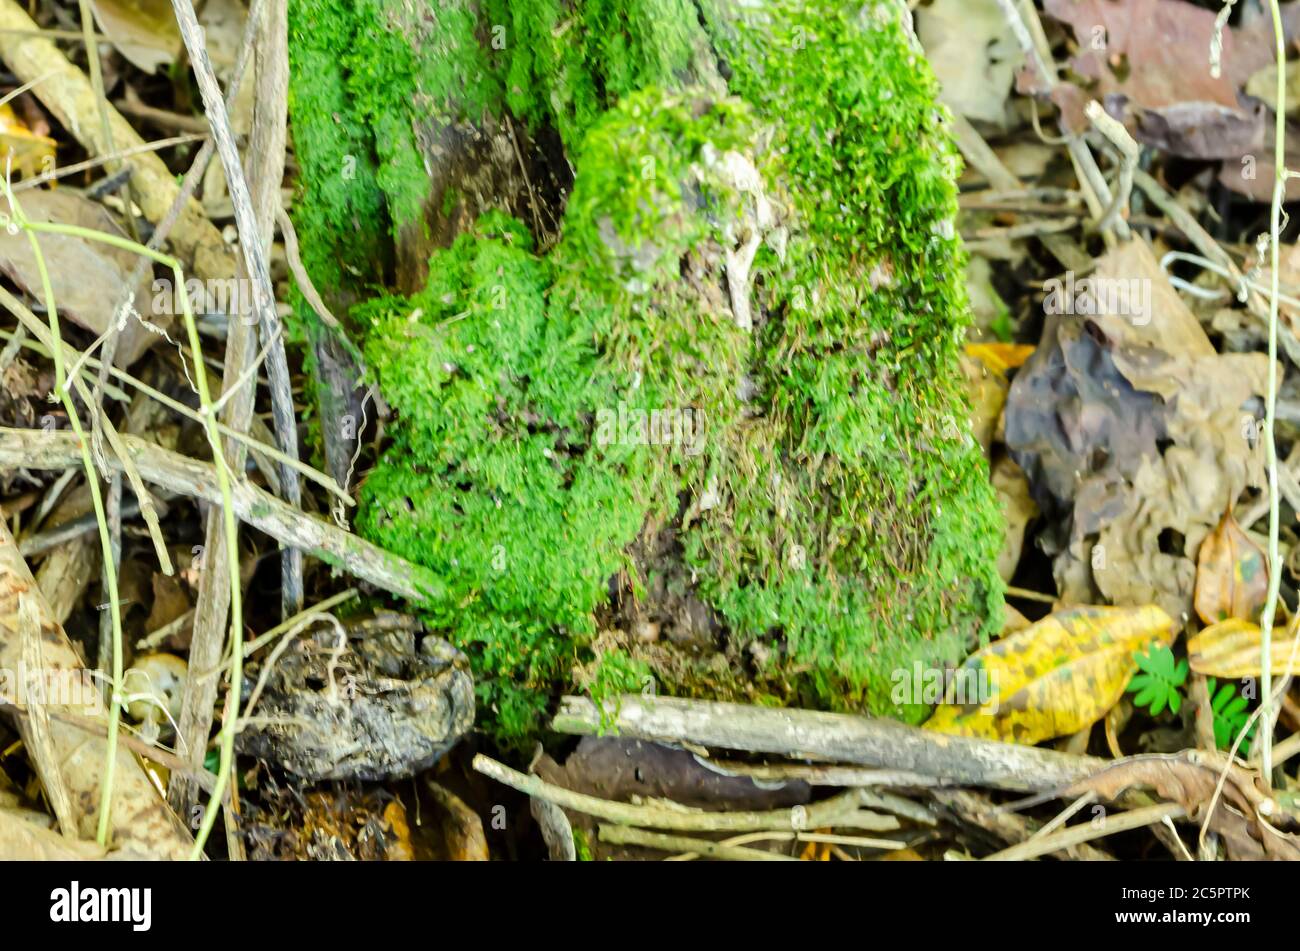 Hypnum Moss Growing At the Foot Of An Old Post Stock Photo